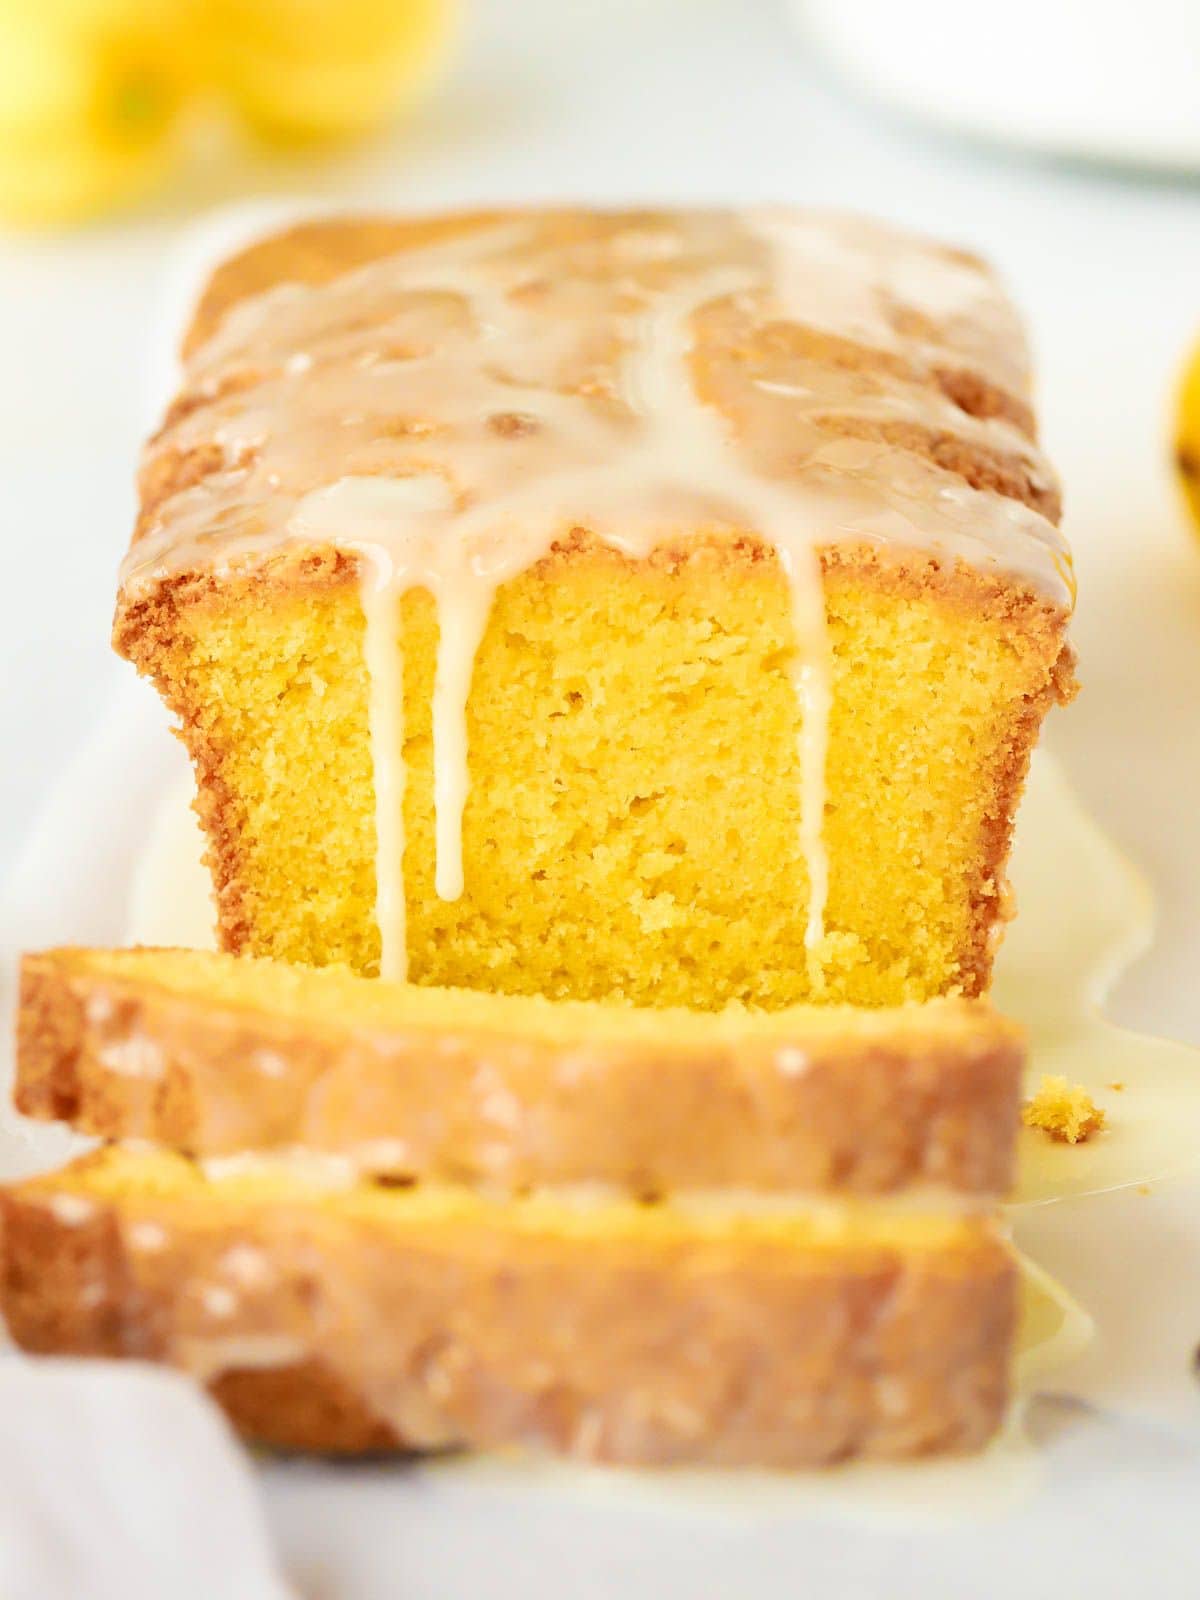 Sliced Lemon Drizzle Cake with icing topping running down the side.